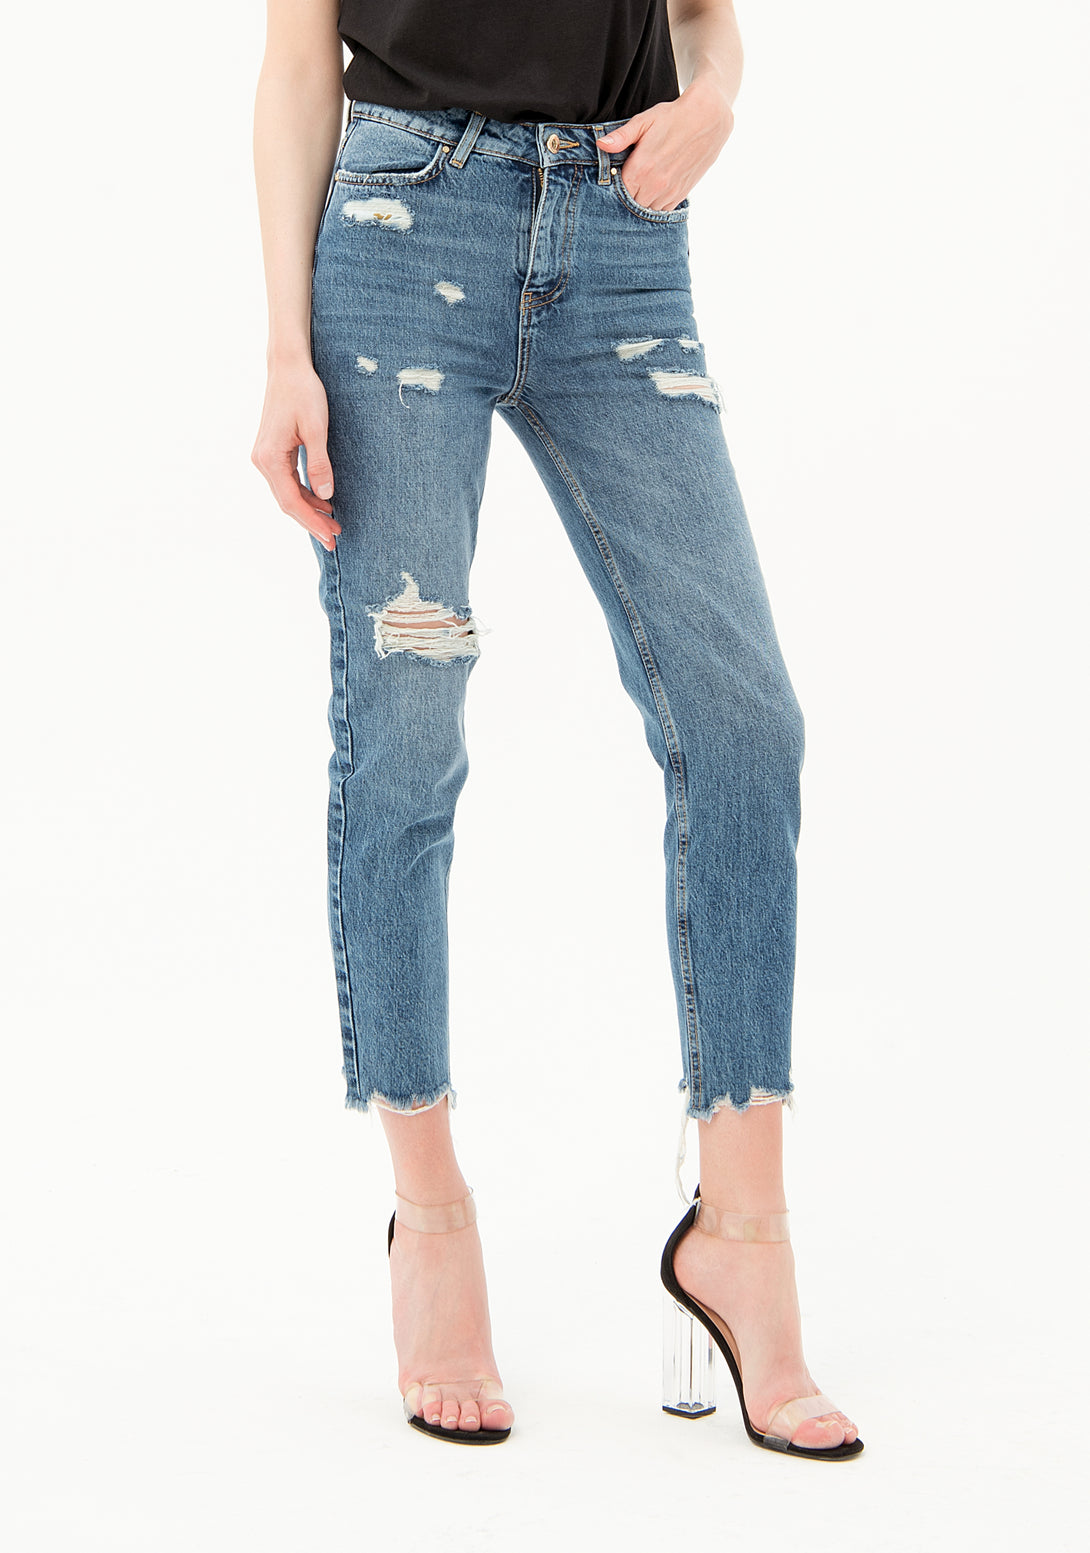 Jeans boyfriend fit made in denim with middle wash and rips